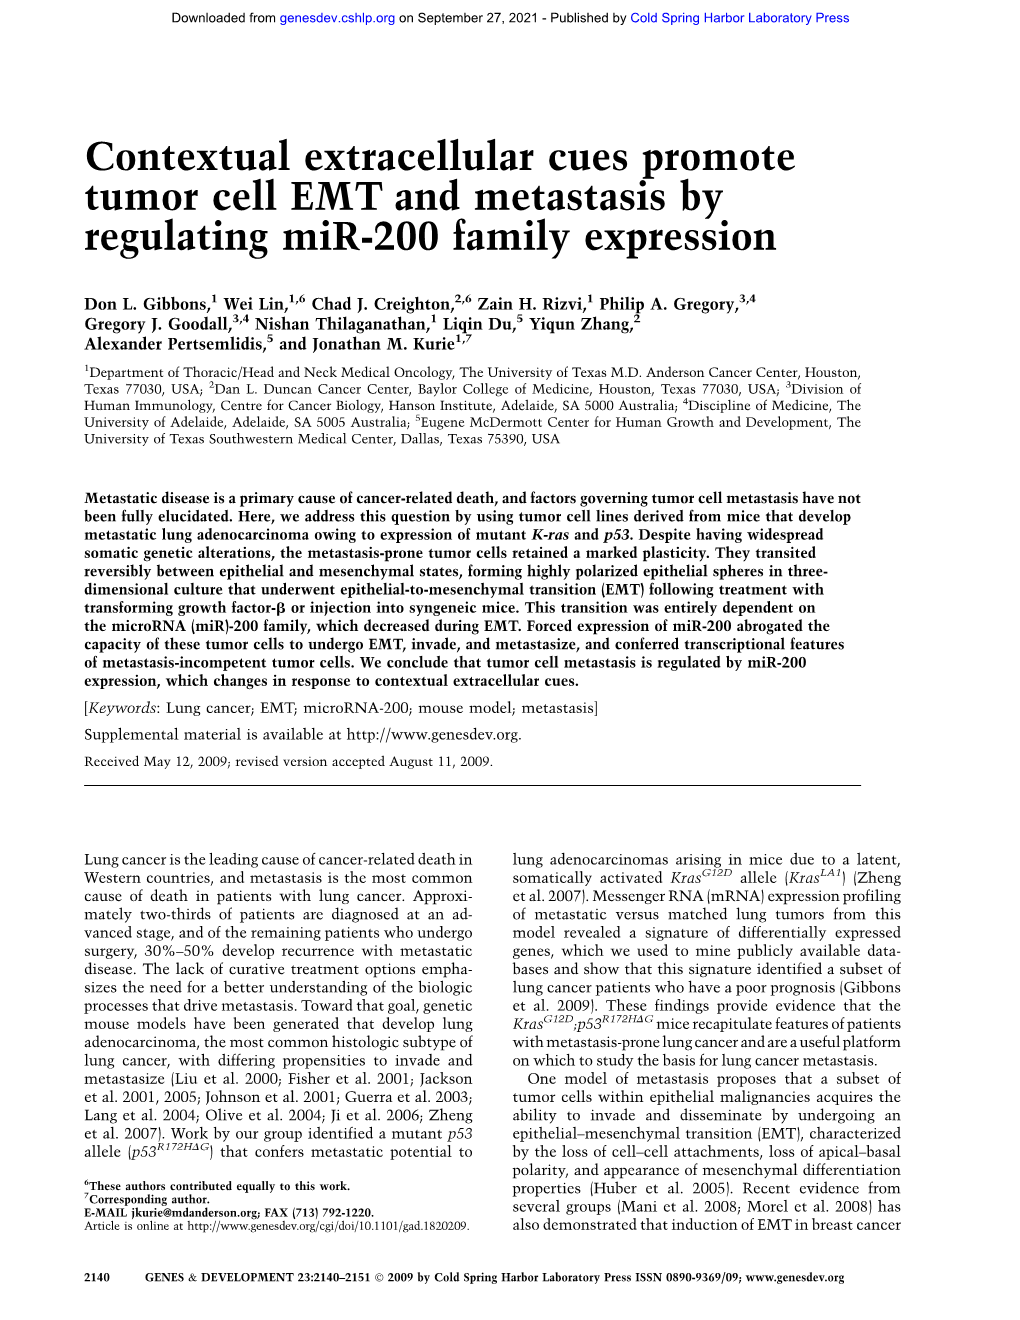 Contextual Extracellular Cues Promote Tumor Cell EMT and Metastasis by Regulating Mir-200 Family Expression